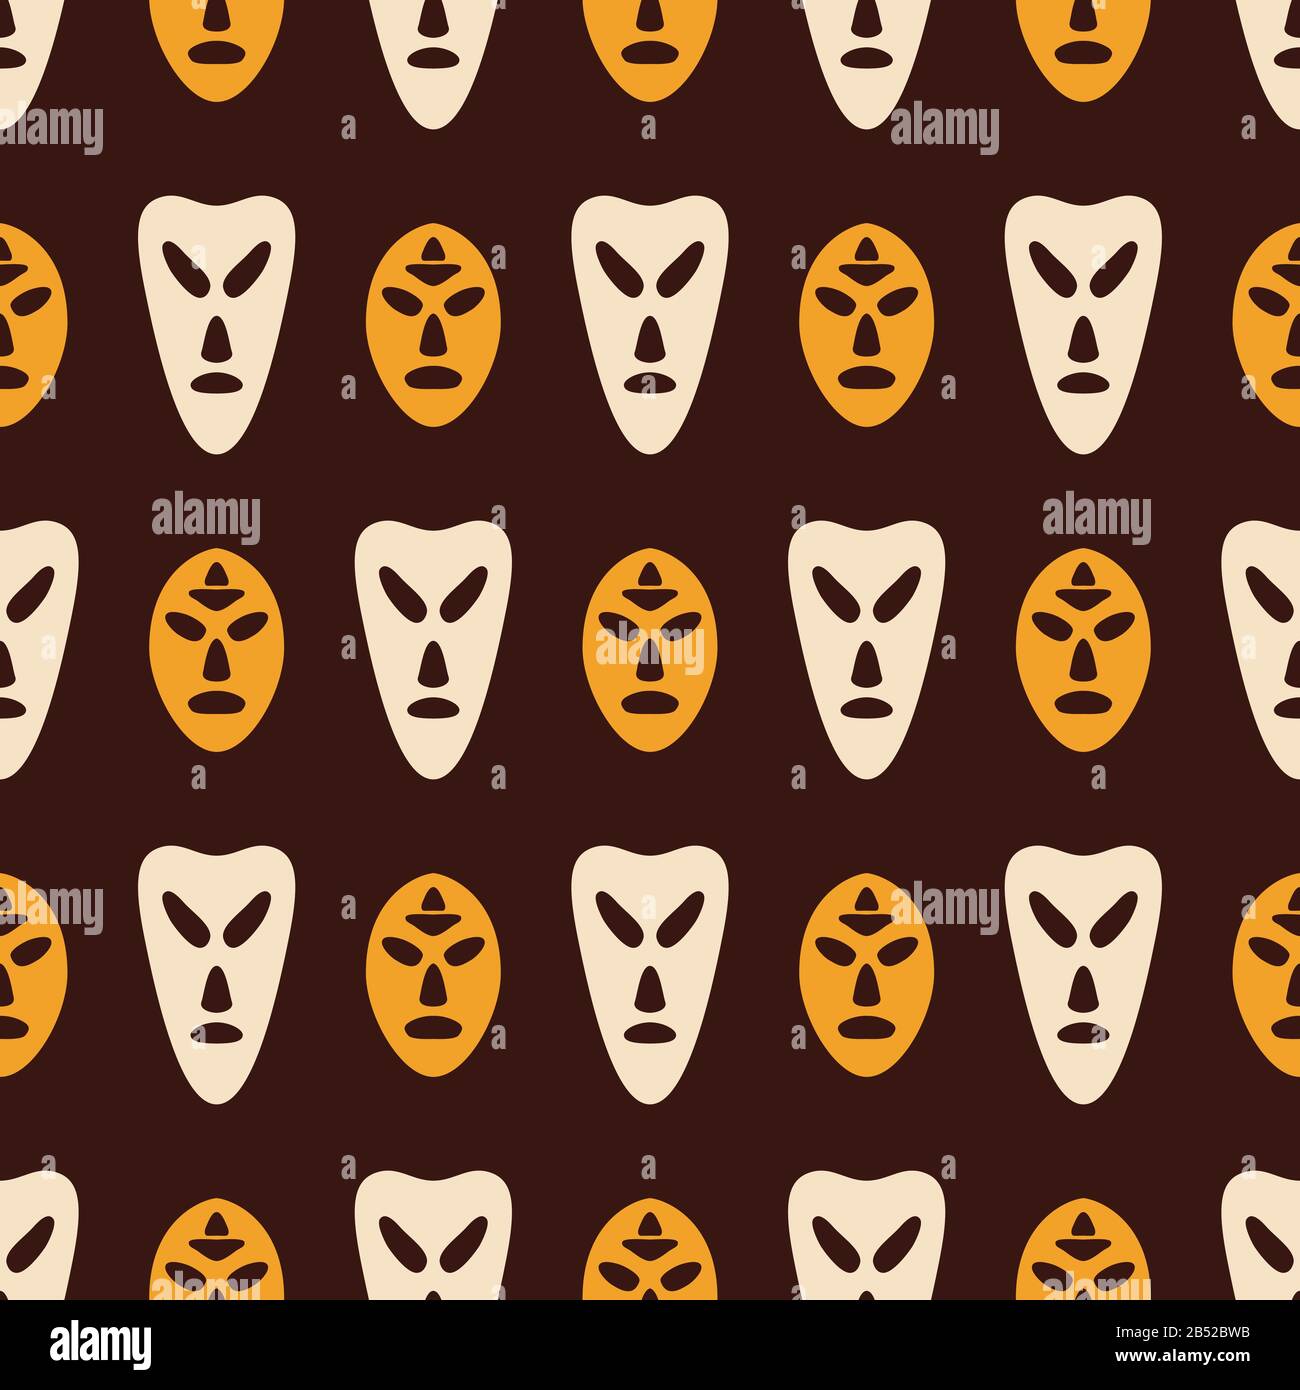 Seamless pattern with silhouettes of masks. Australian, african aboriginal culture. Tribal ethnic seamless background. Isolated on brown background. Stock Vector